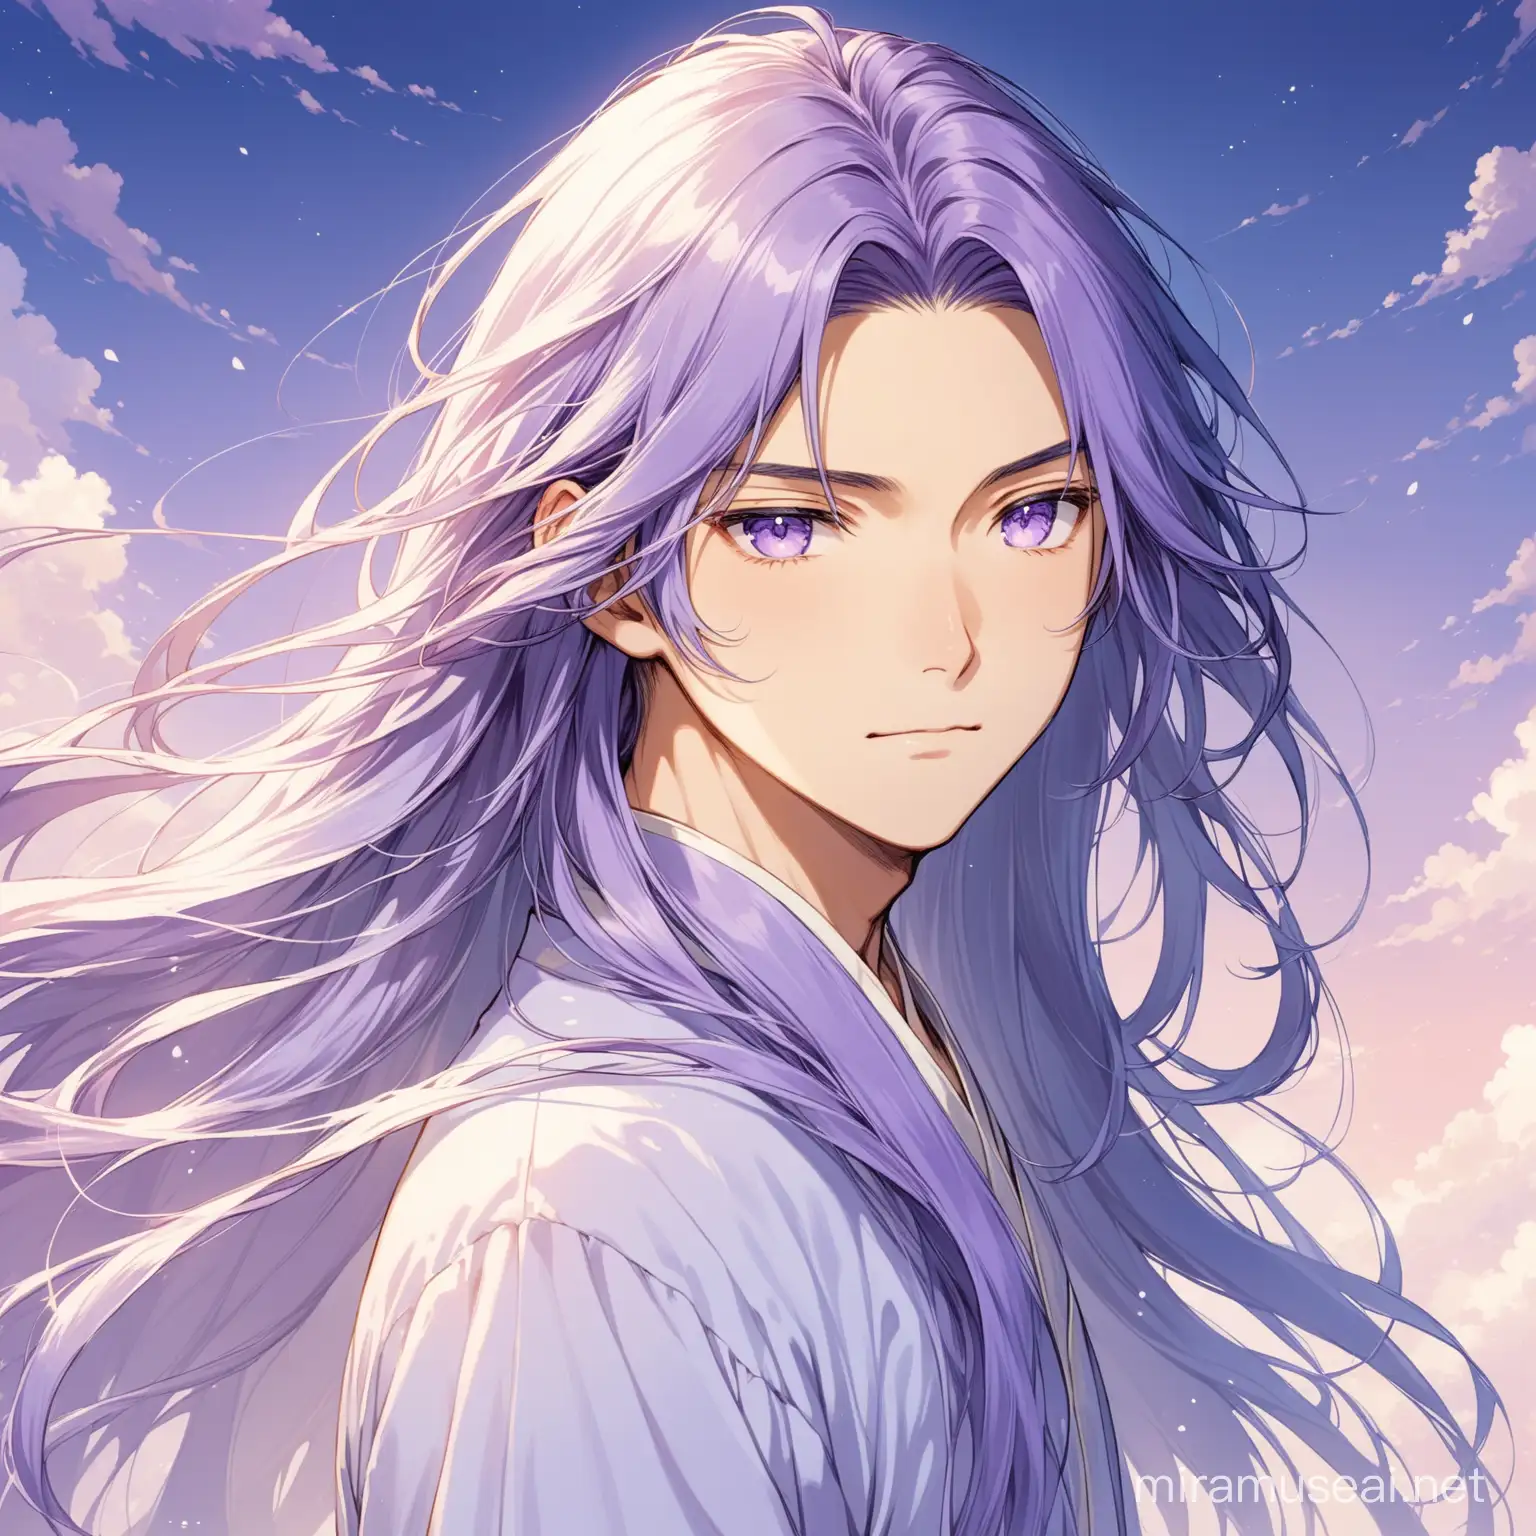 Ren Sato possesses a gentle and innocent demeanor, with soft features and expressive eyes that communicate a myriad of emotions. His long, flowing hair is a muted shade of lavender, falling gracefully around his face. He dresses in simple, pastel-colored attire that mirrors his peaceful nature.